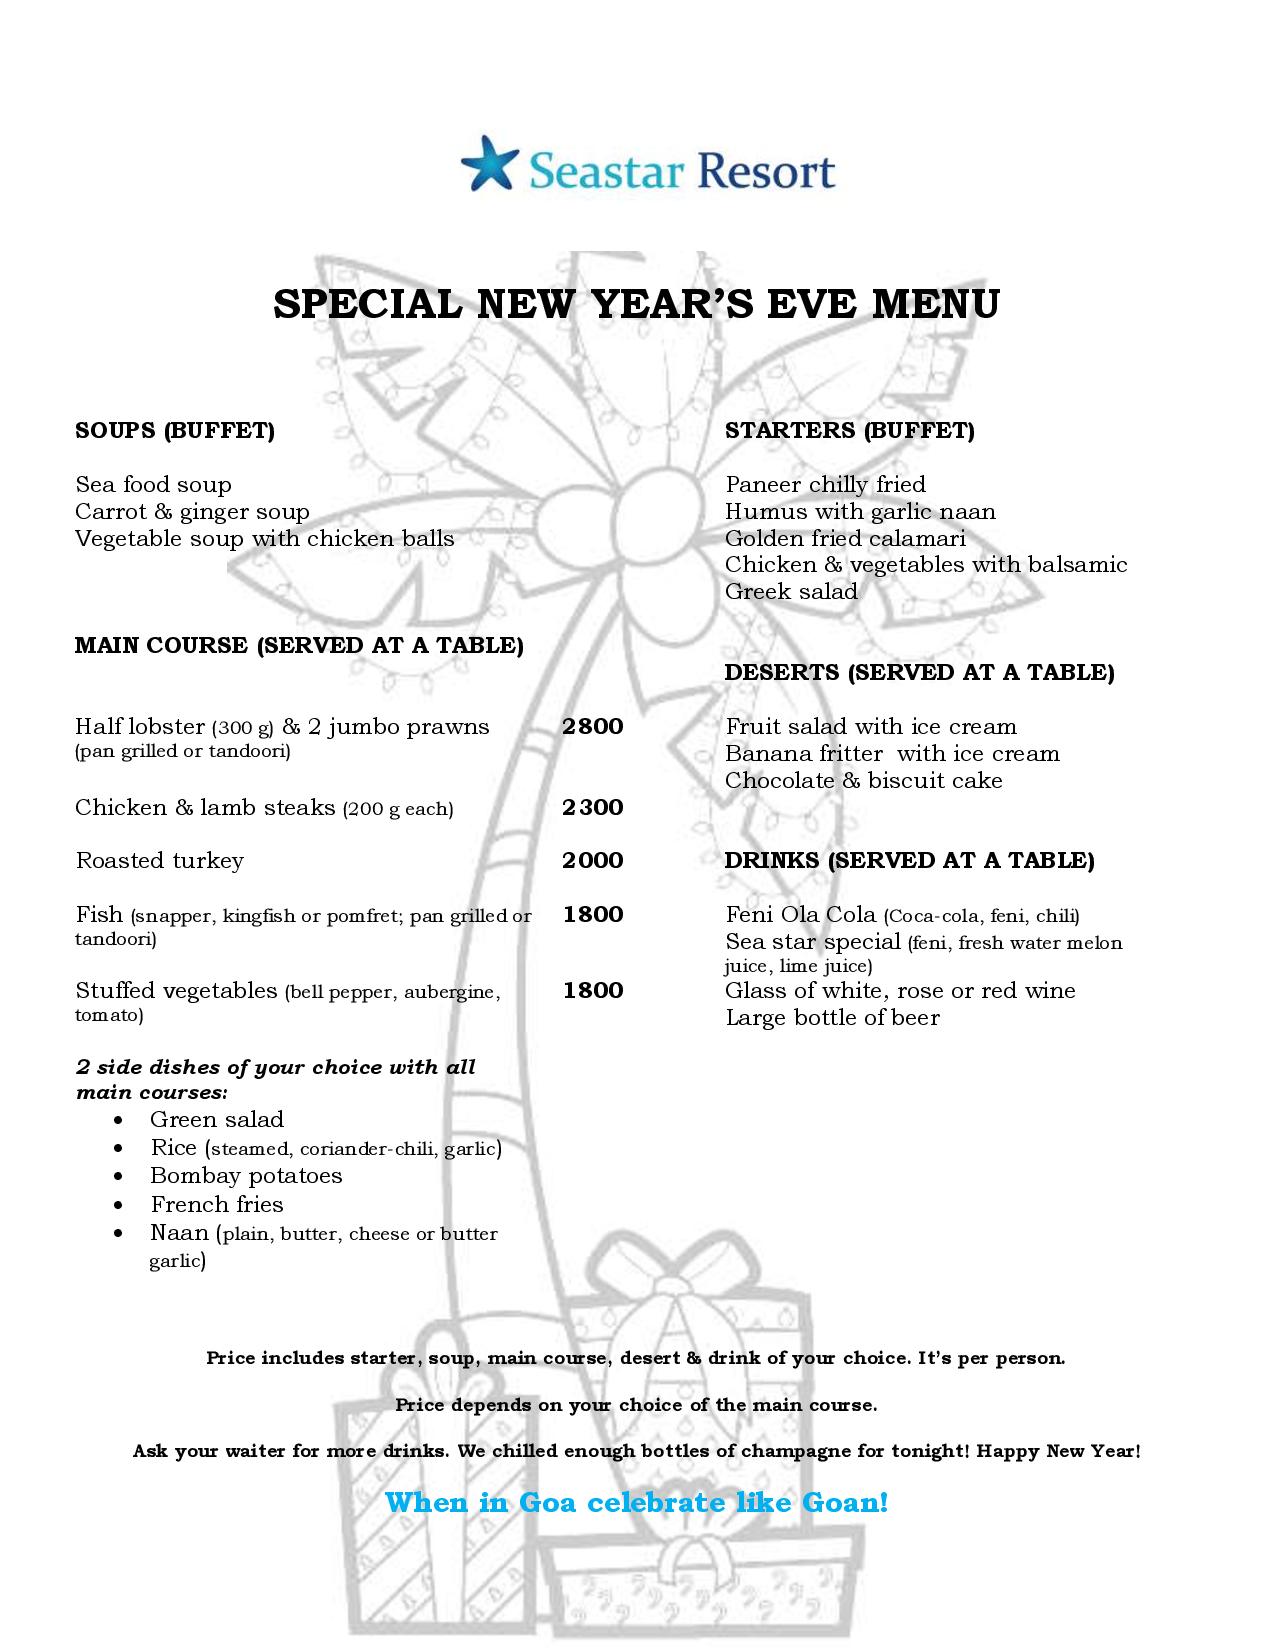 SEA STAR SPECIAL NEW YEARS EVE MENU-page-001 (1)